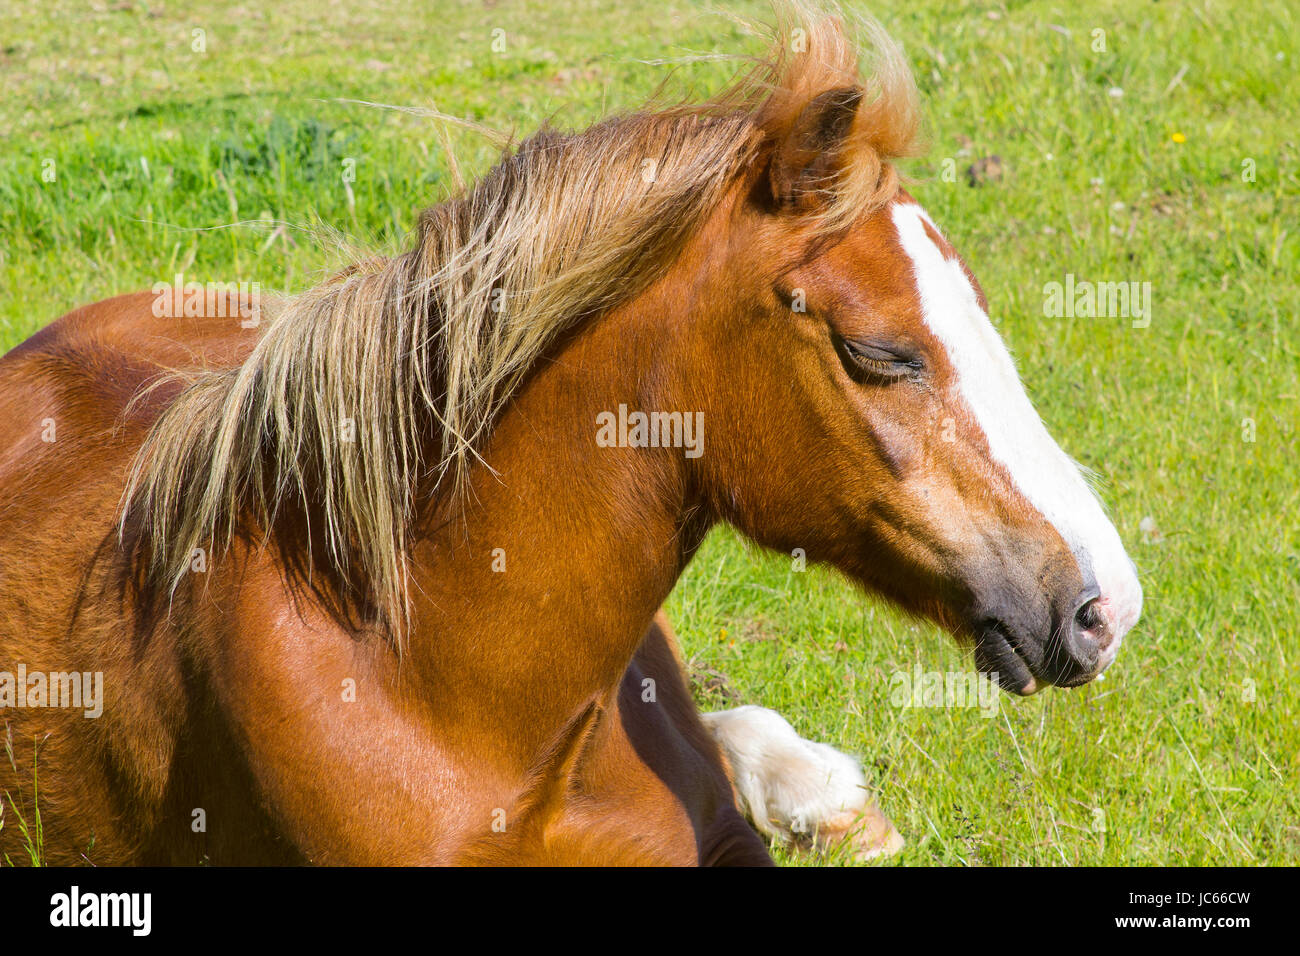 A close up of a beautiful playful young foal with head and mane as it lies down in a field on a bright sunny day Stock Photo